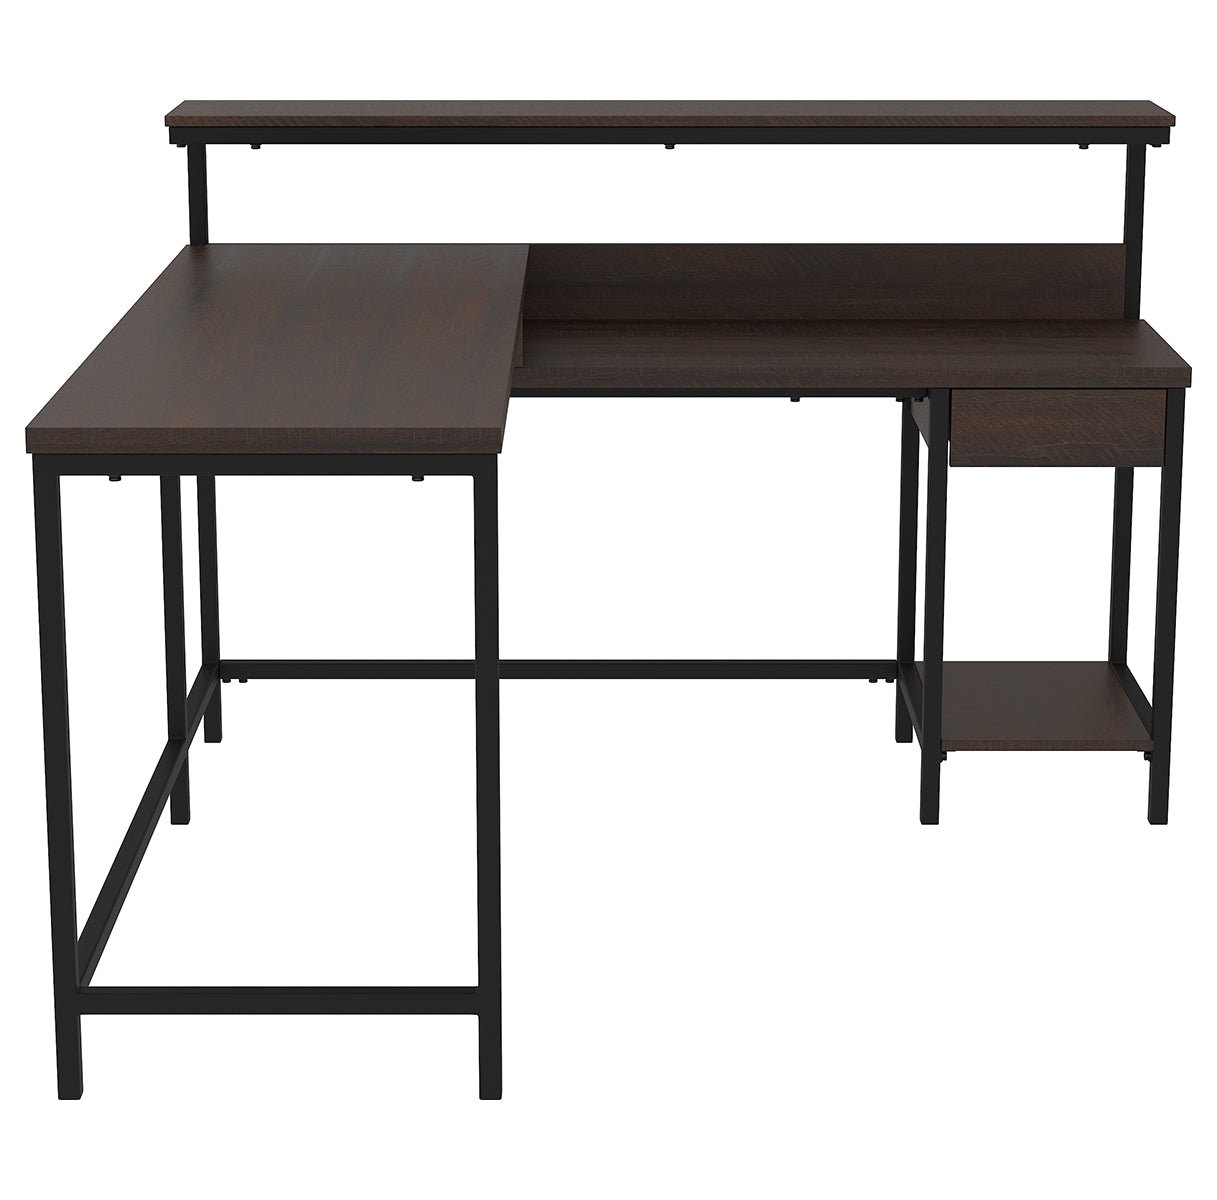 Camiburg Home Office L-Desk with Storage